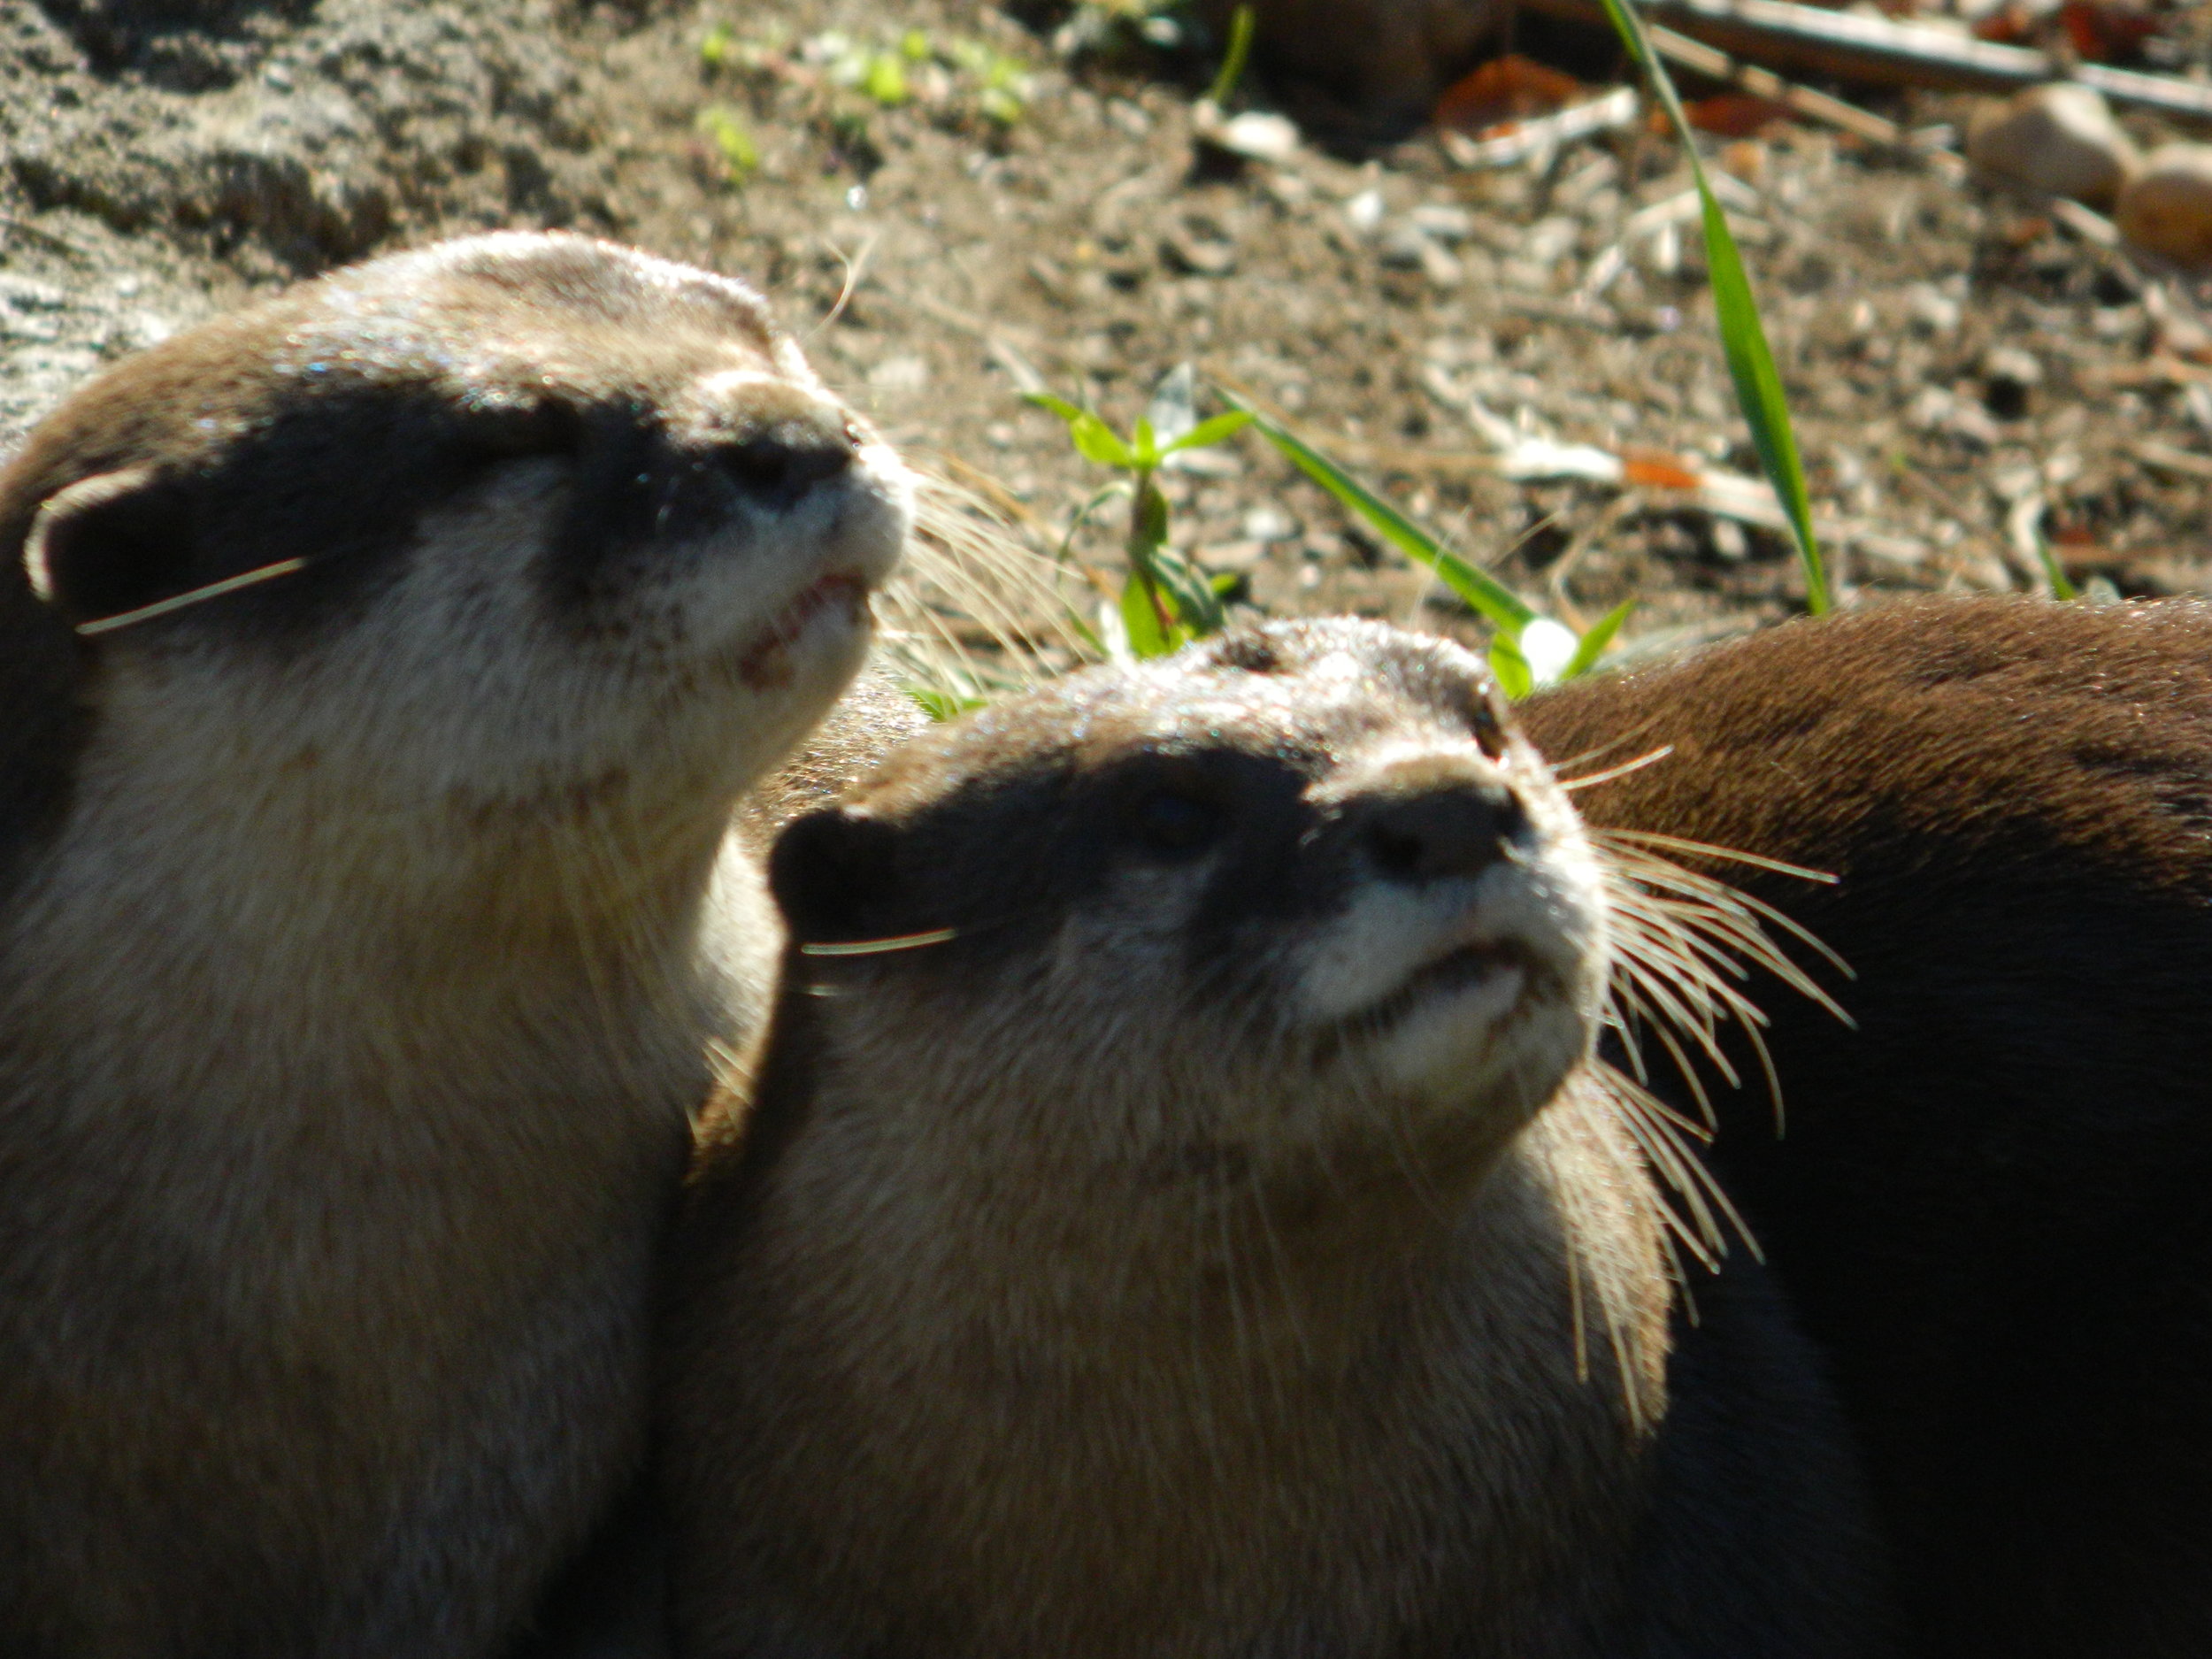 Something Has Caught Otters' Attention